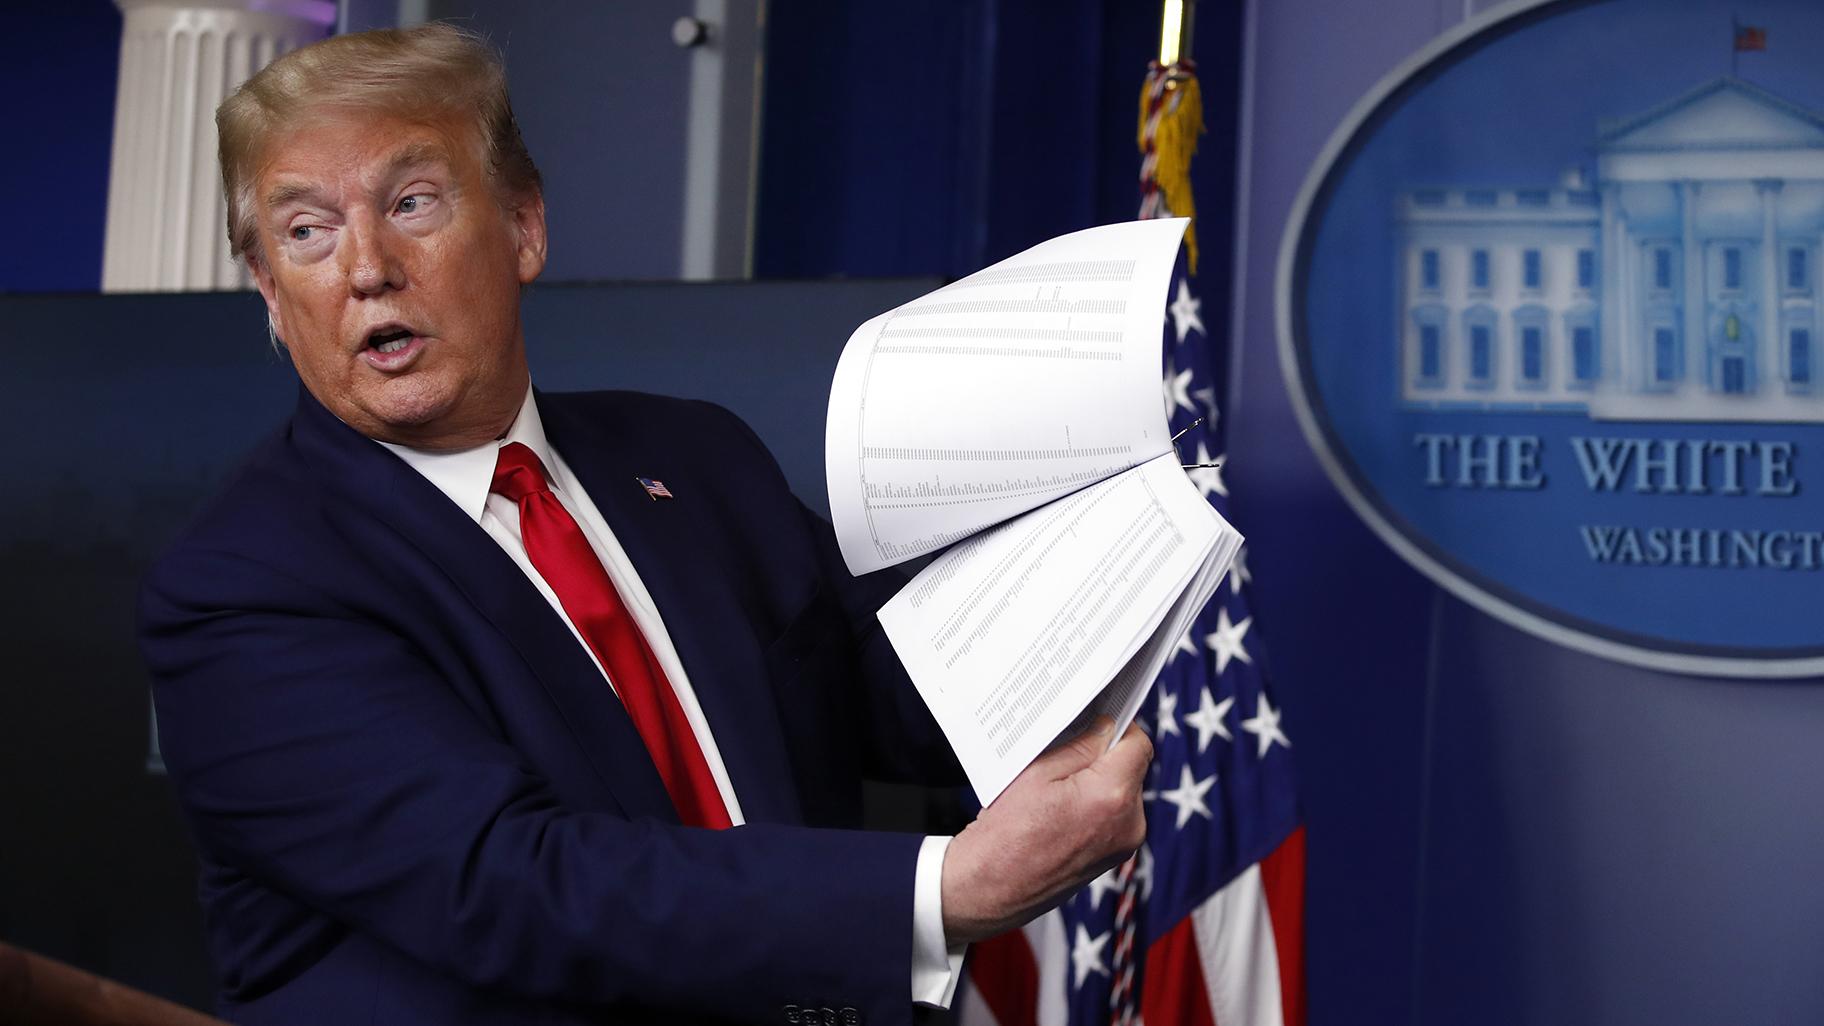 President Donald Trump holds up papers as he speaks about the coronavirus in the James Brady Press Briefing Room of the White House on April 20, 2020, in Washington. (AP Photo / Alex Brandon, File)